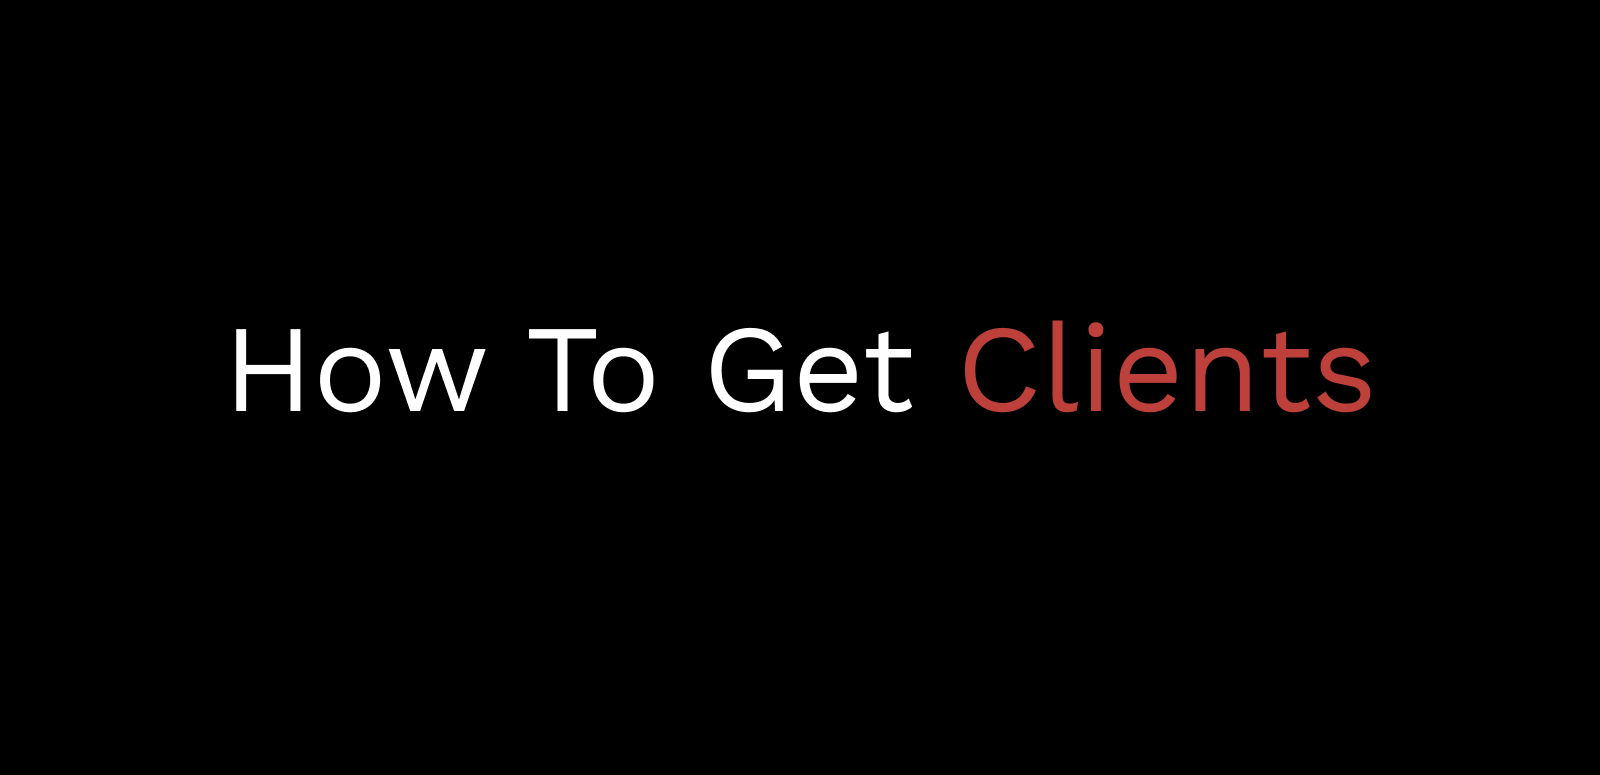 How To Get Clients